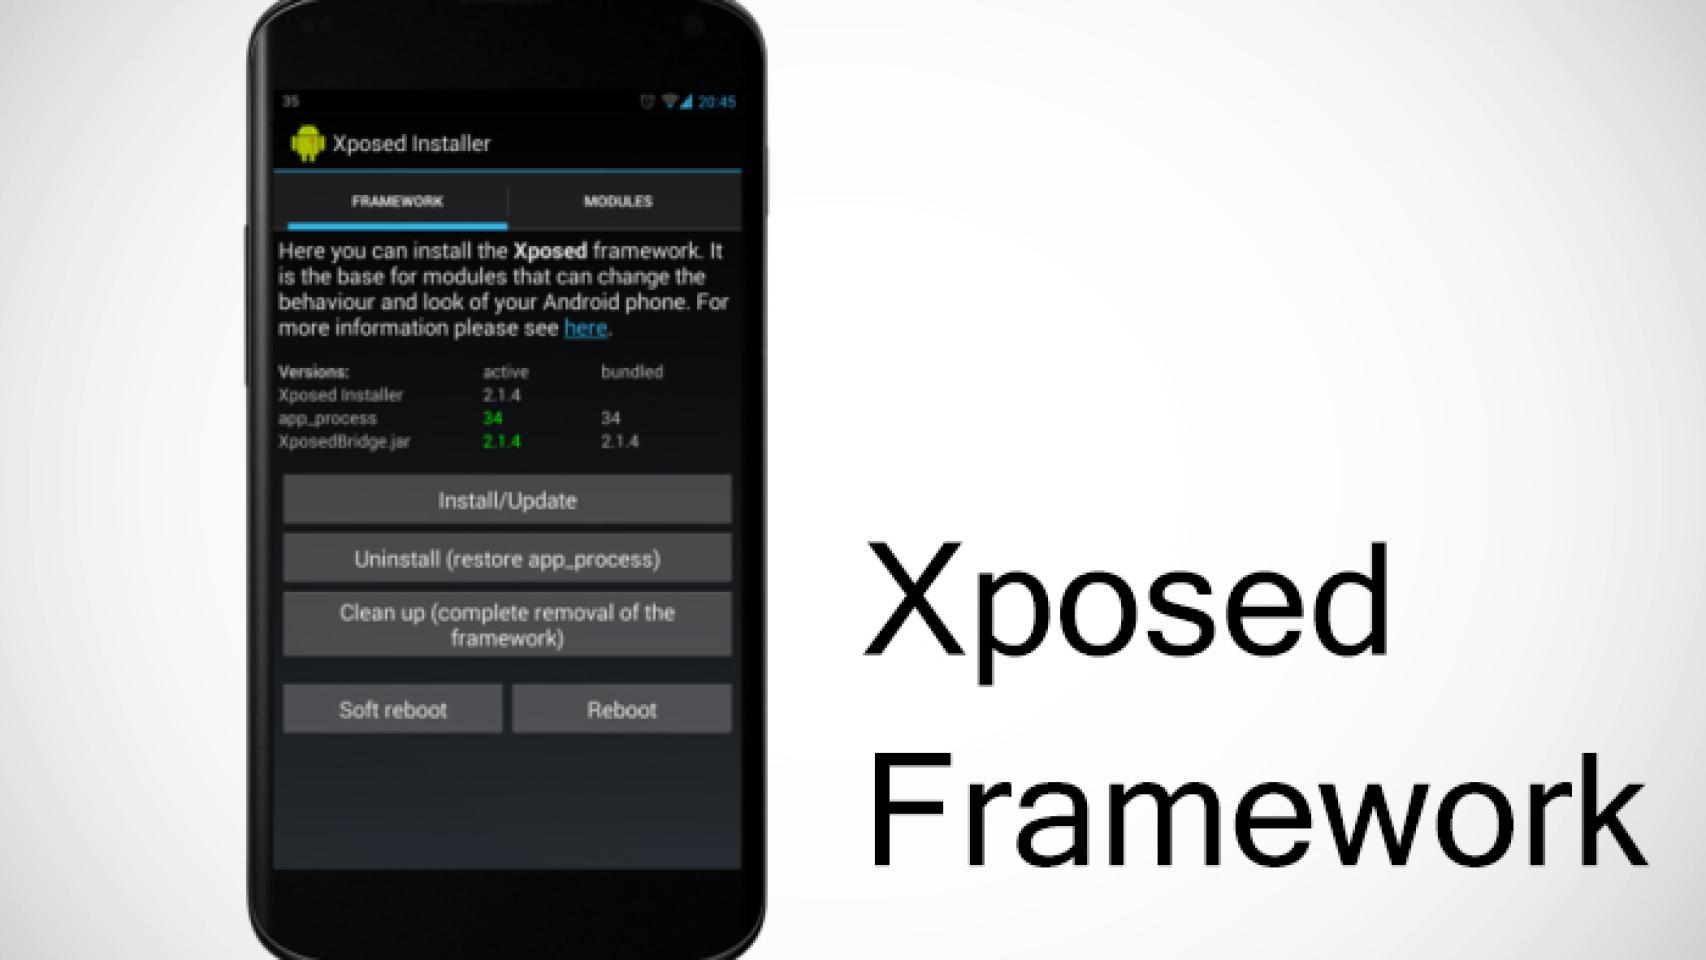 Xposed Framework llegará antes a Android L que a KitKat/ART